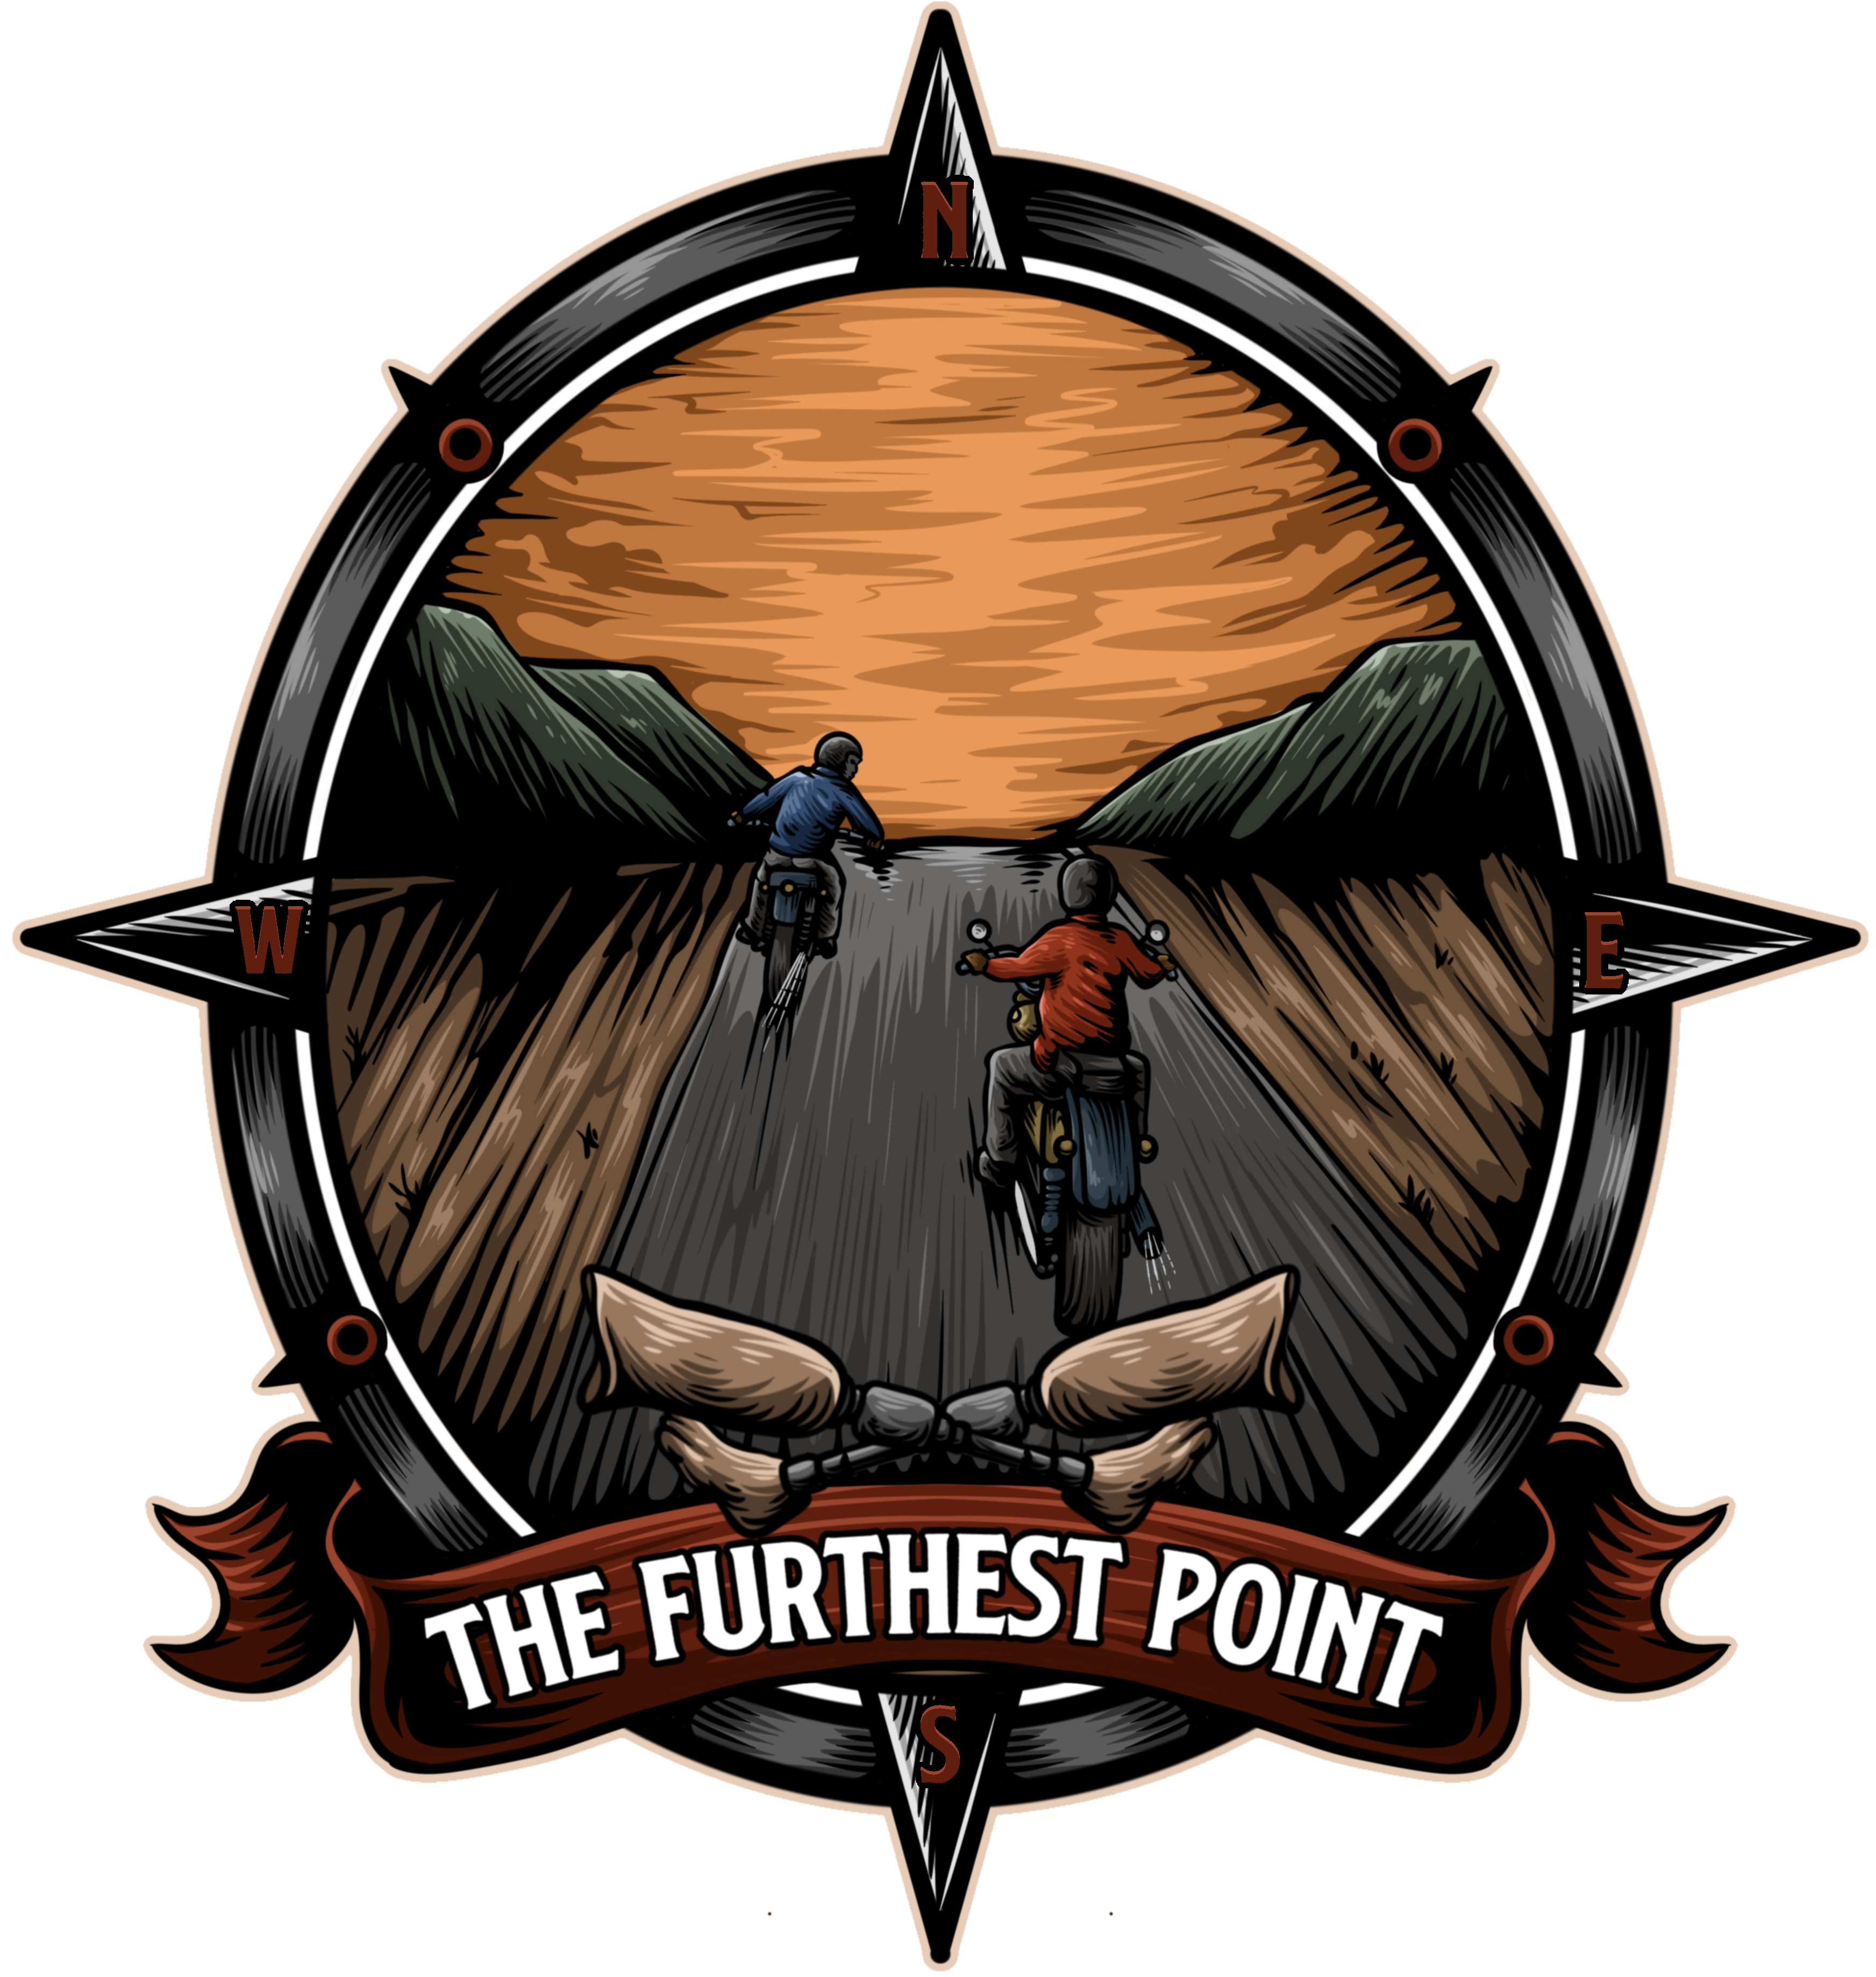 The Furthest Point